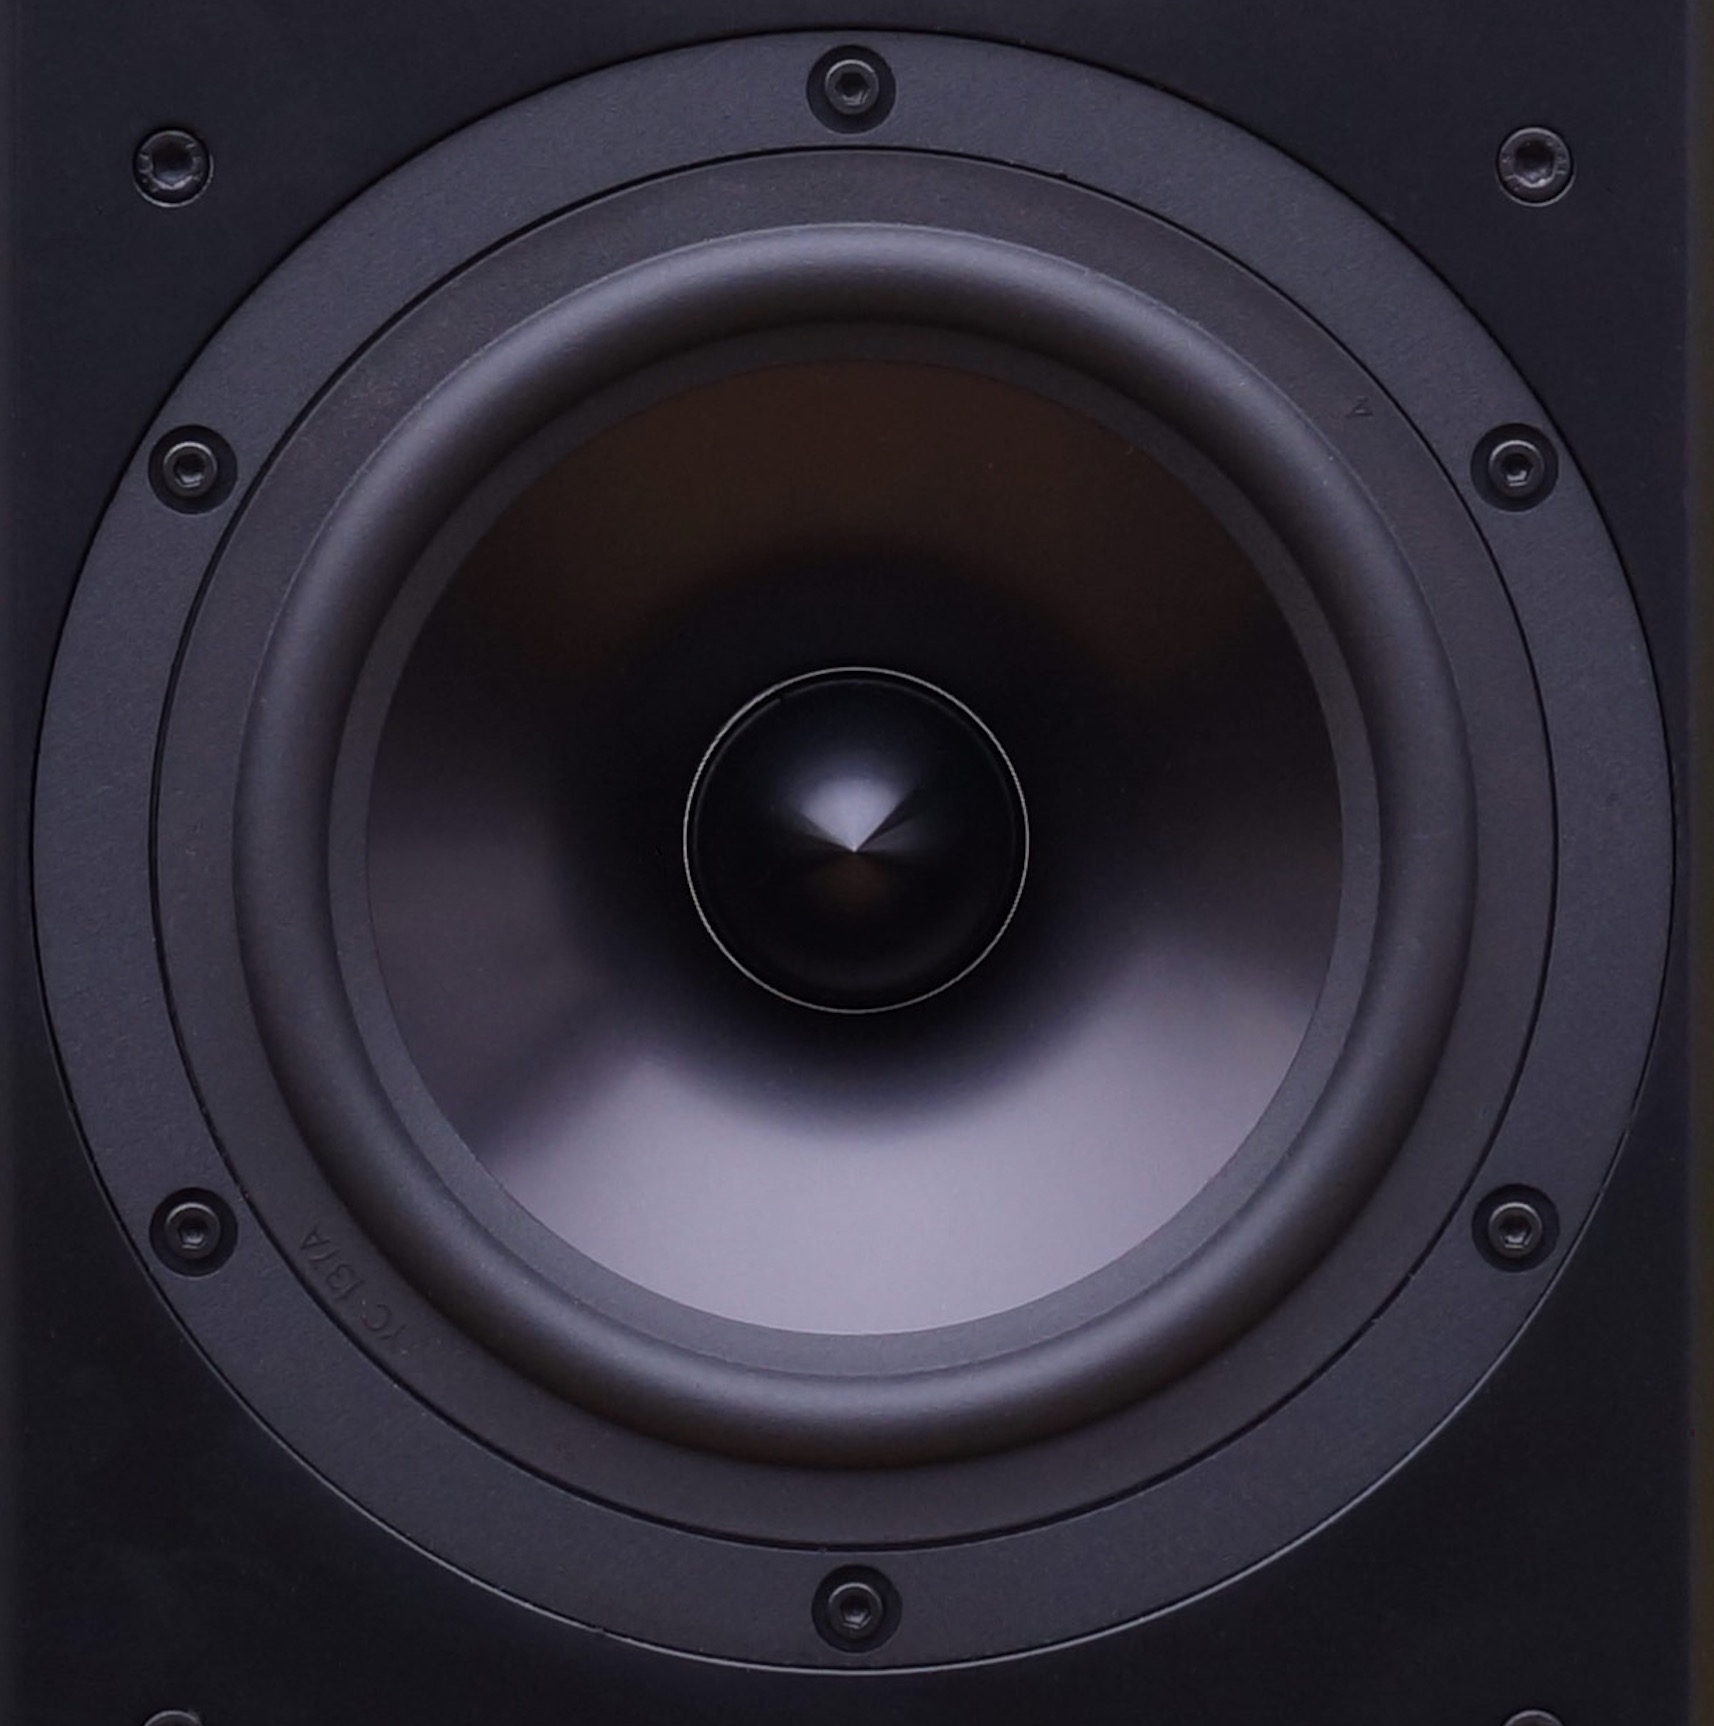 Prophet P1 Speakers from Ophidian: Divine Messages?